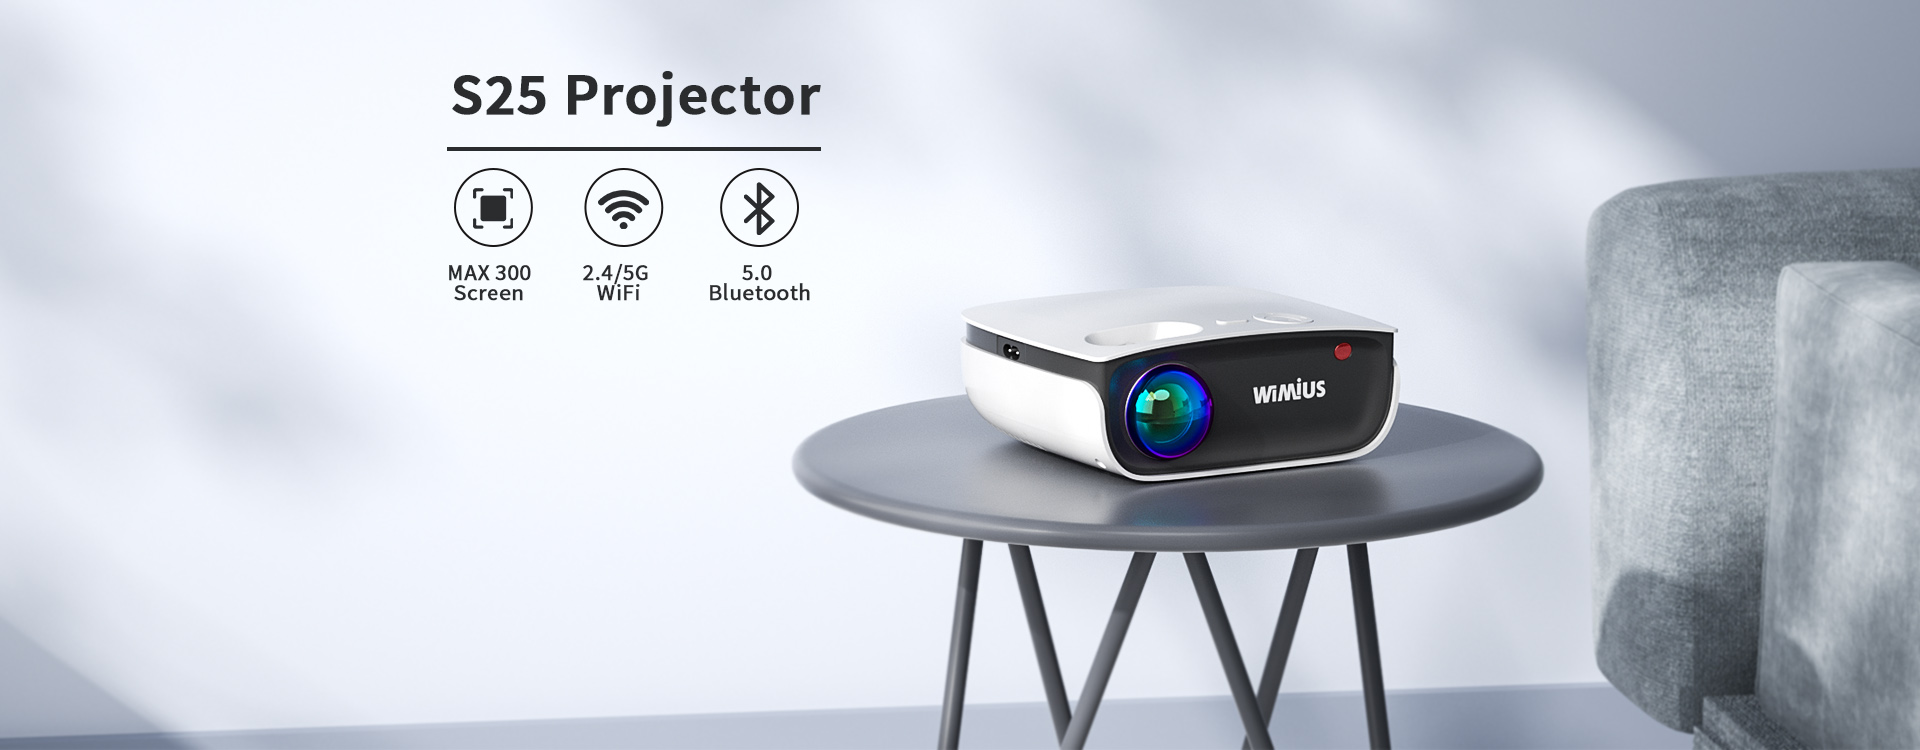 Wimius P64 projector unboxing and review. 